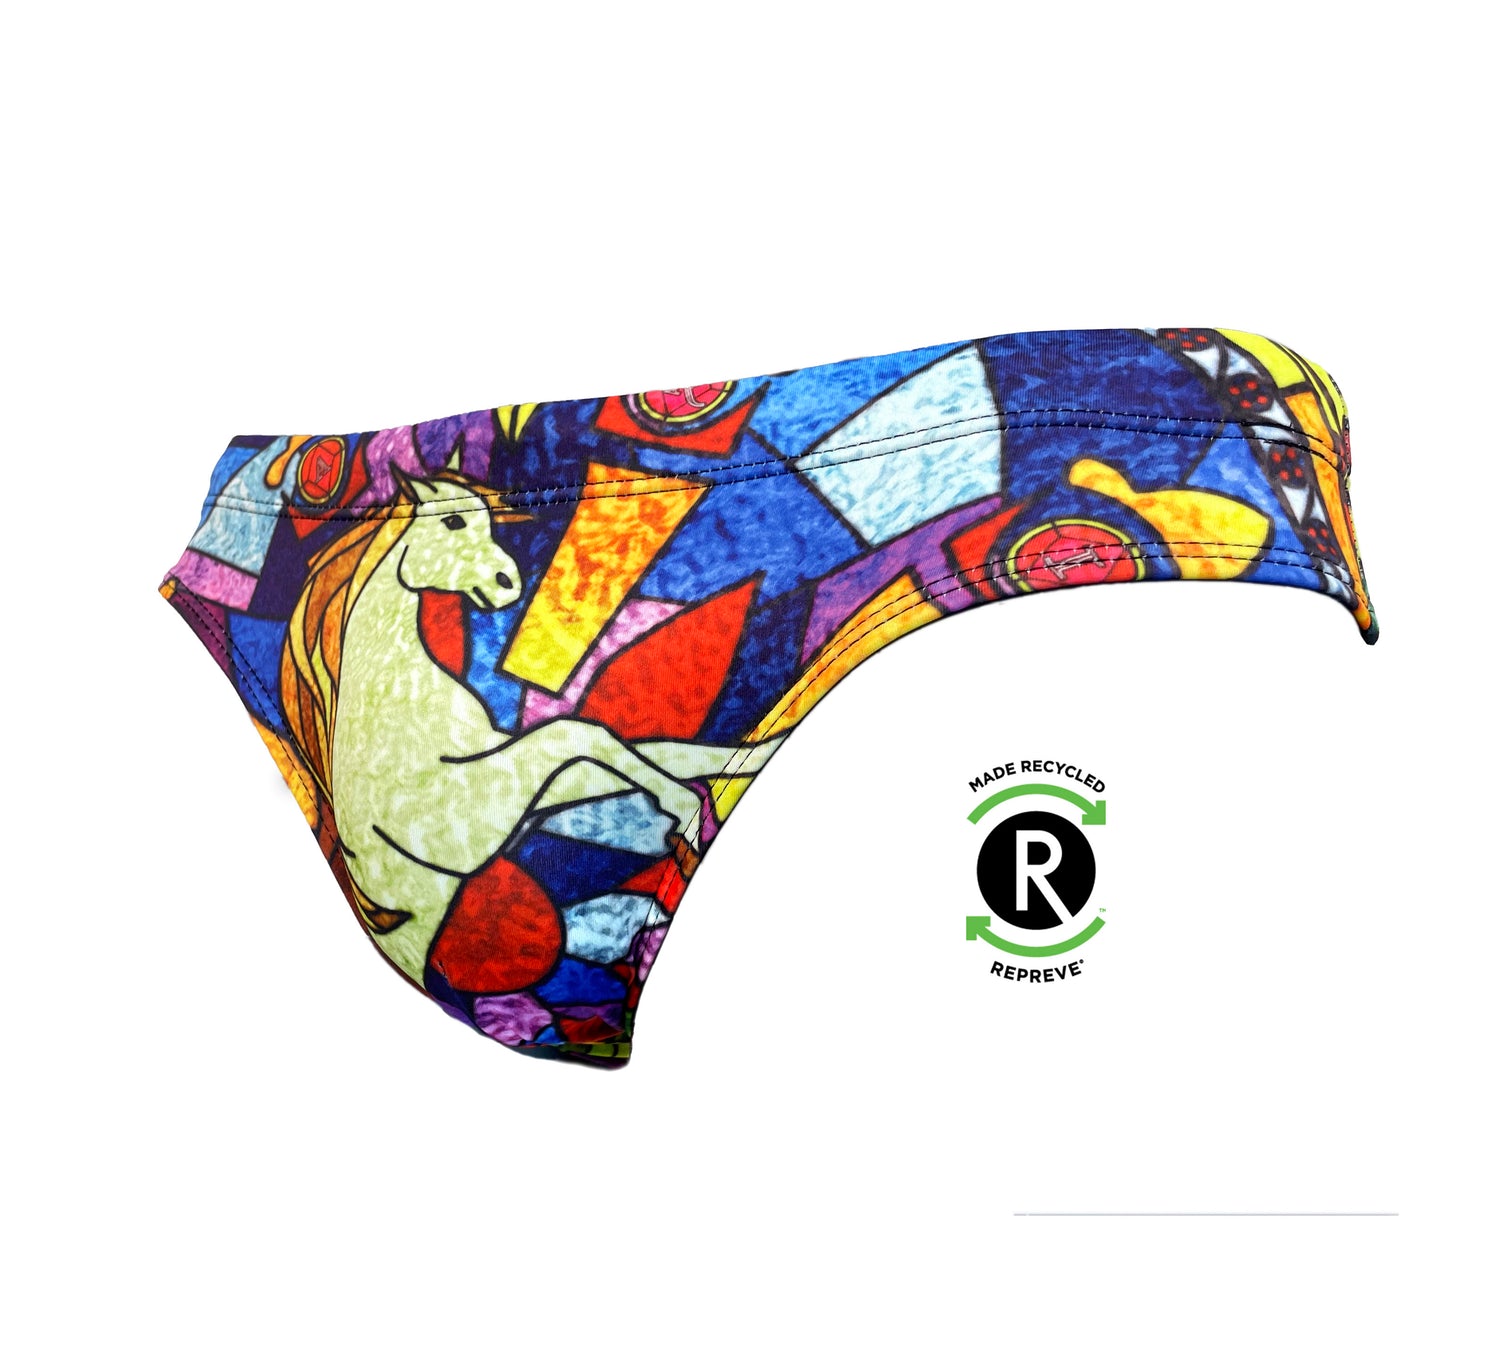 Stained Glass Men's Swim Outfit Collection